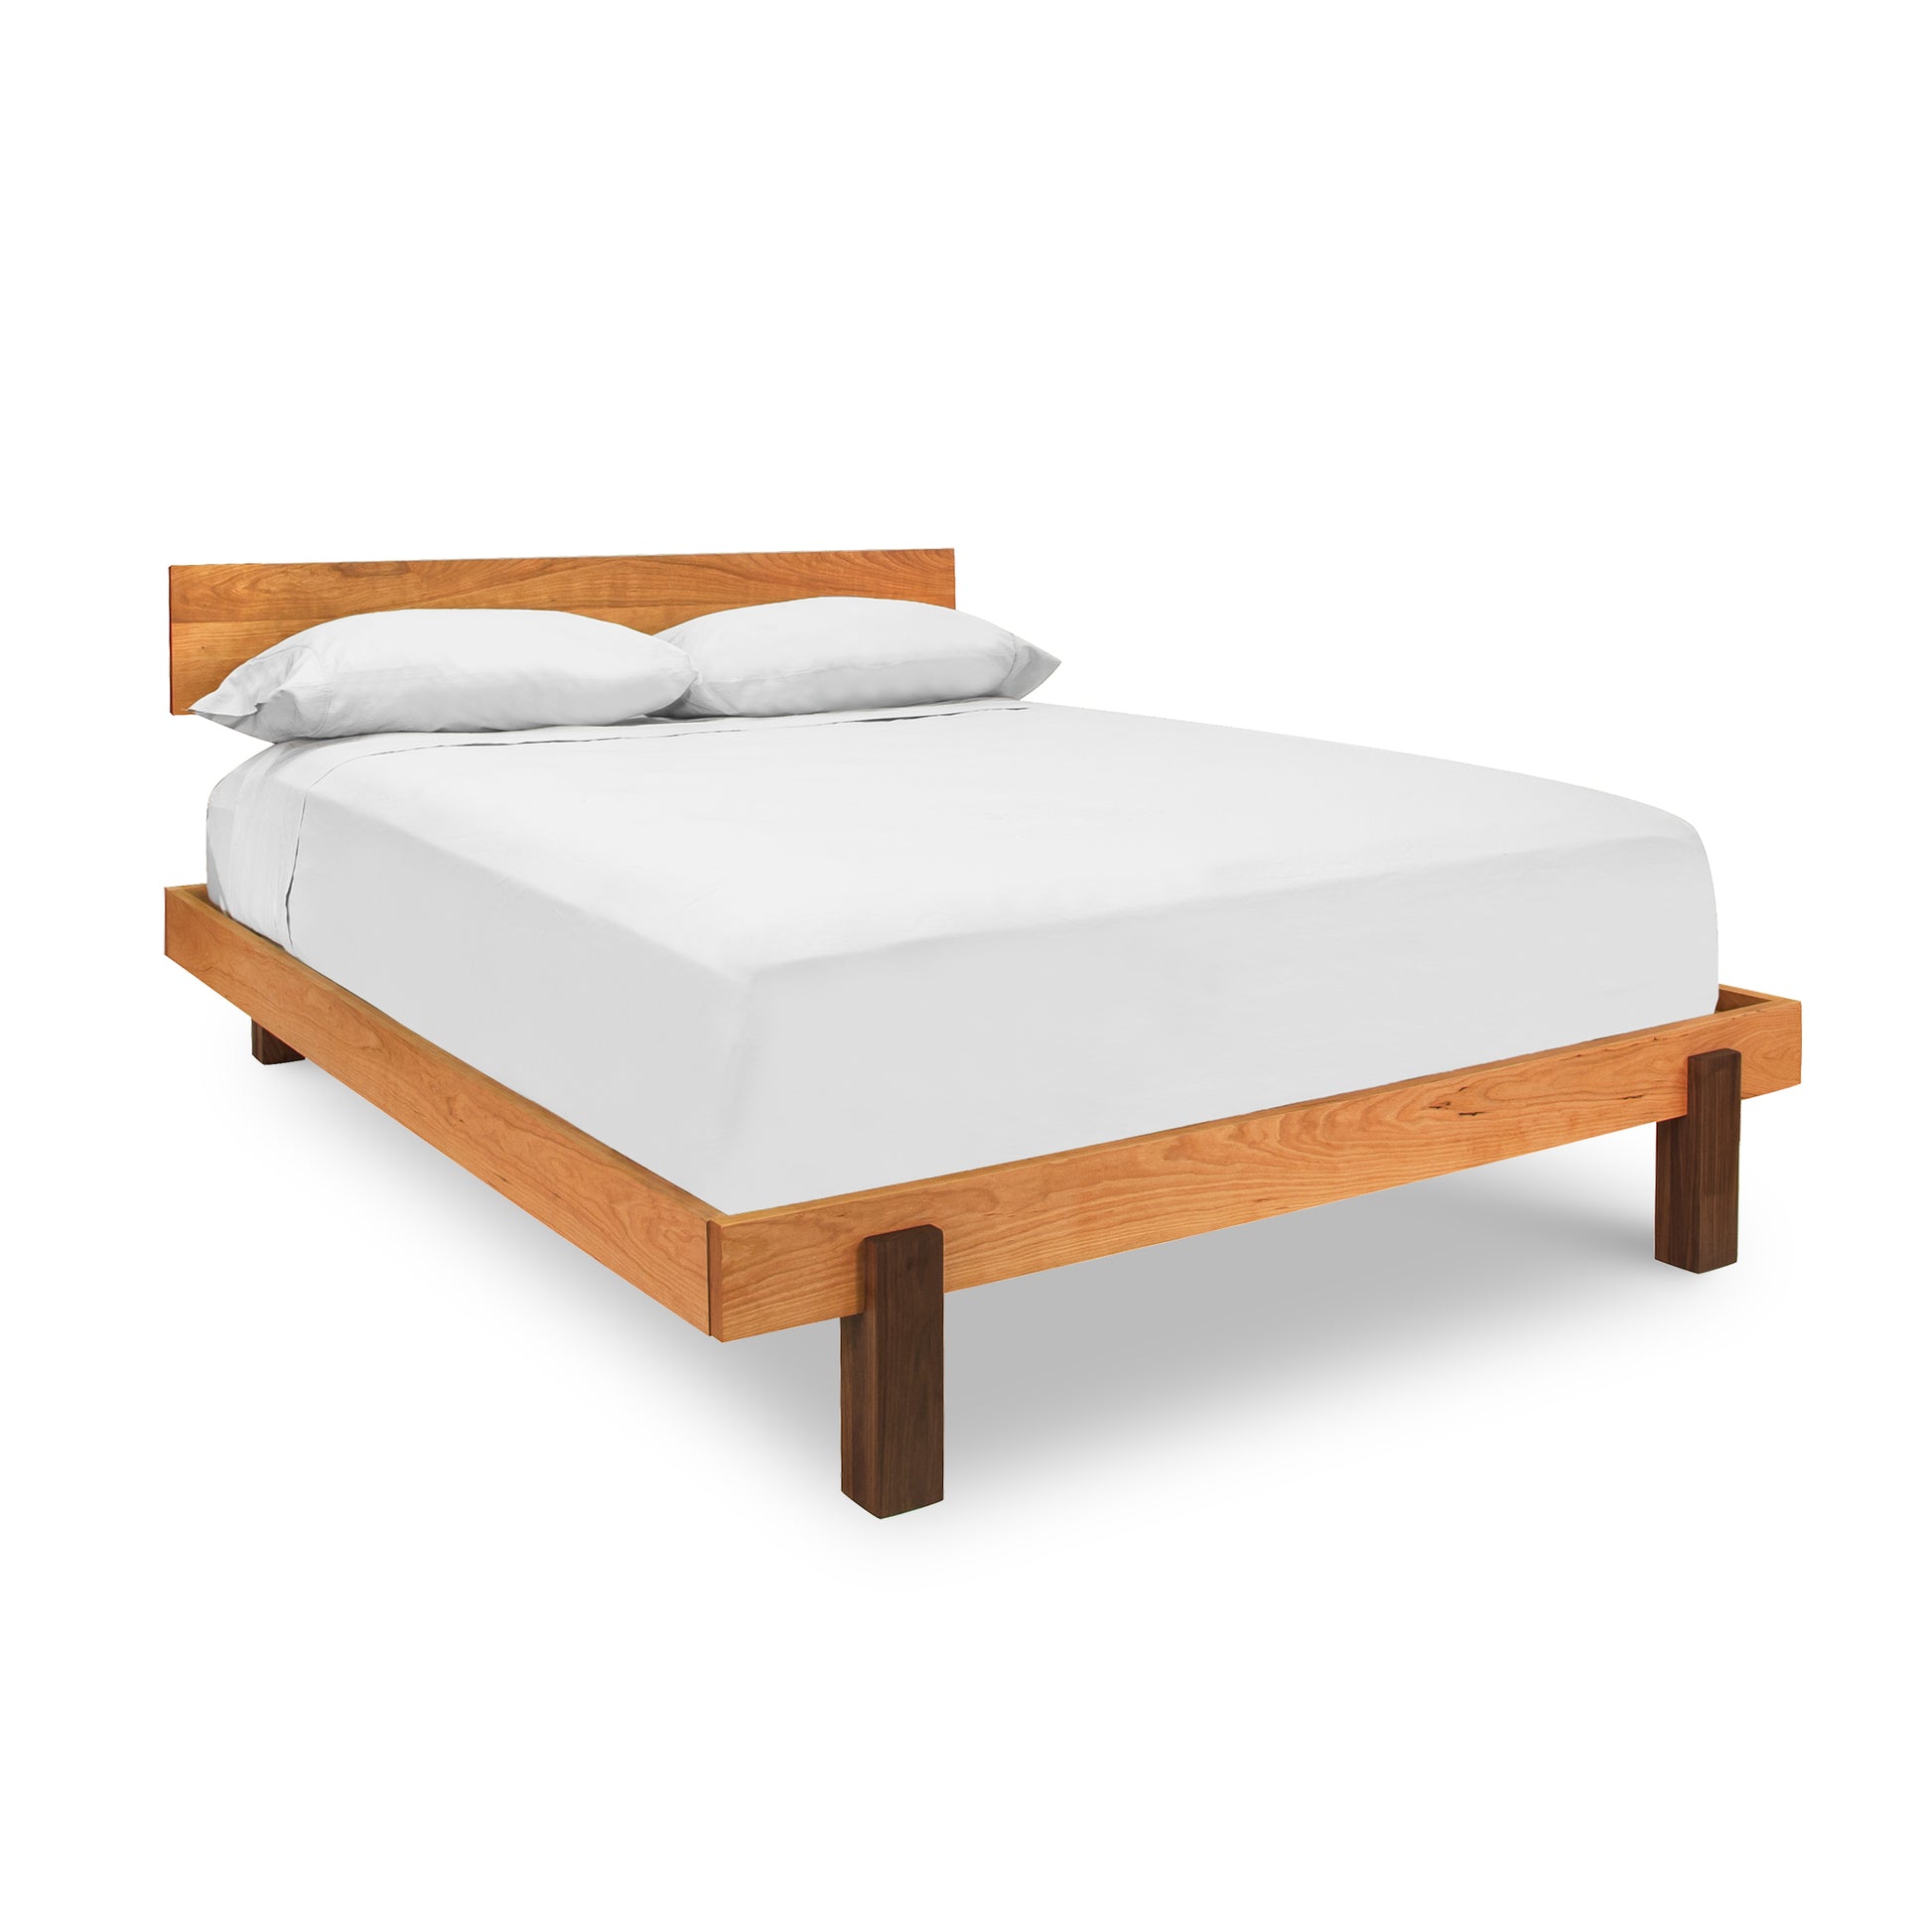 A Vermont Furniture Designs Modern American Platform Bed crafted from solid hardwoods, with a white mattress and two pillows, isolated on a white background.